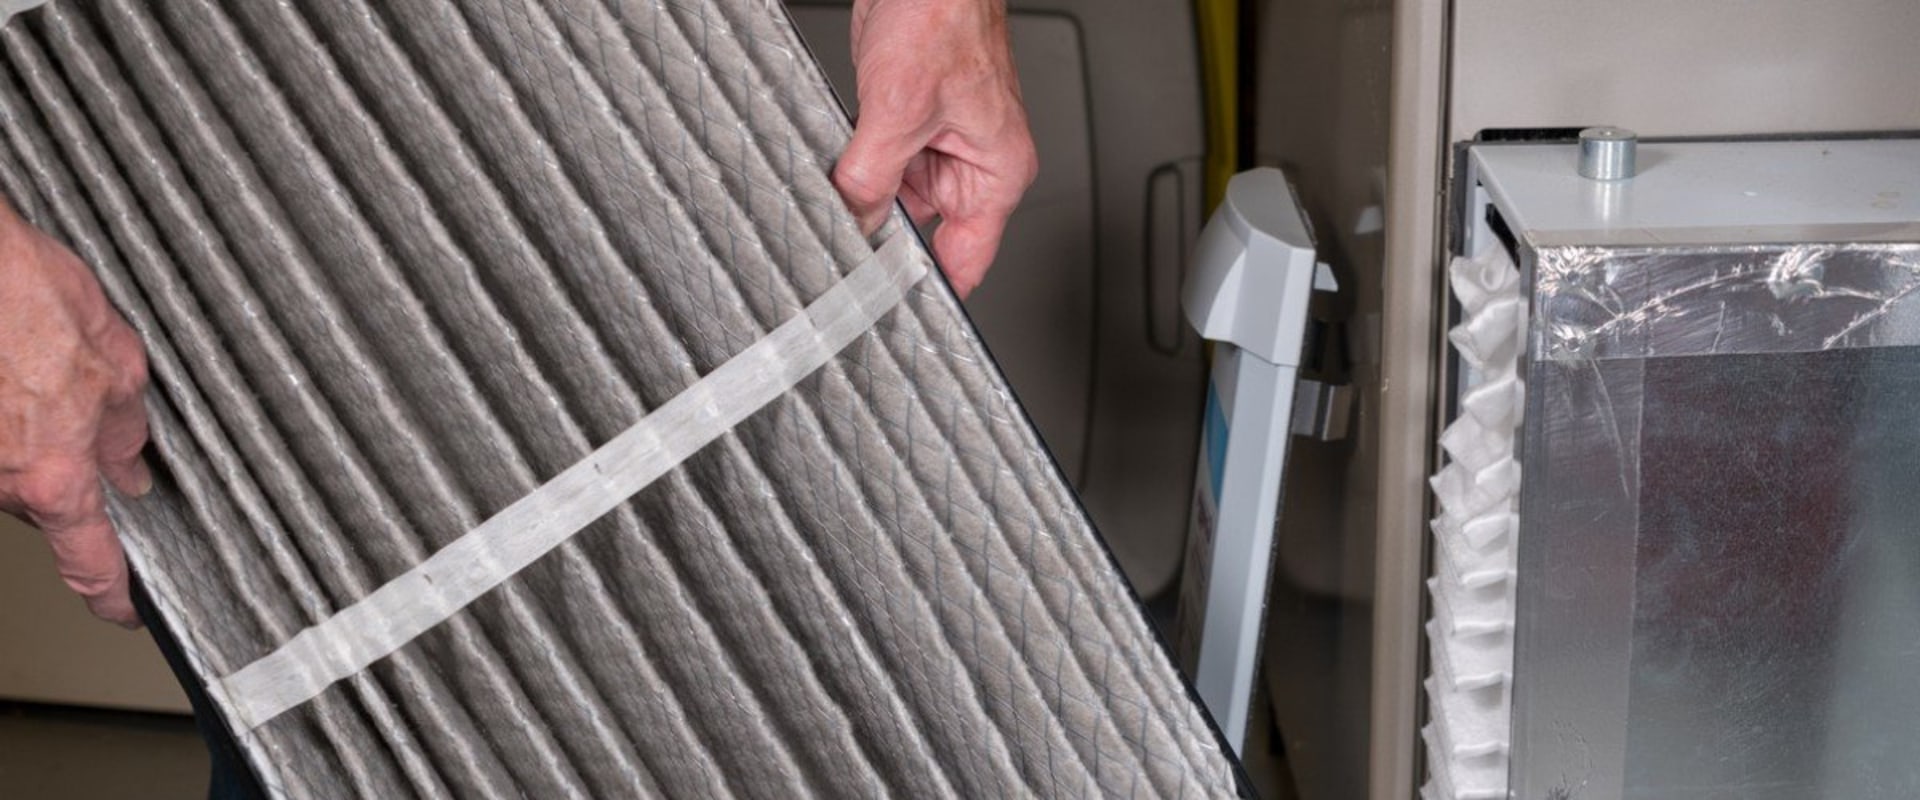 How to Replace Furnace Filter: What You Need to Know